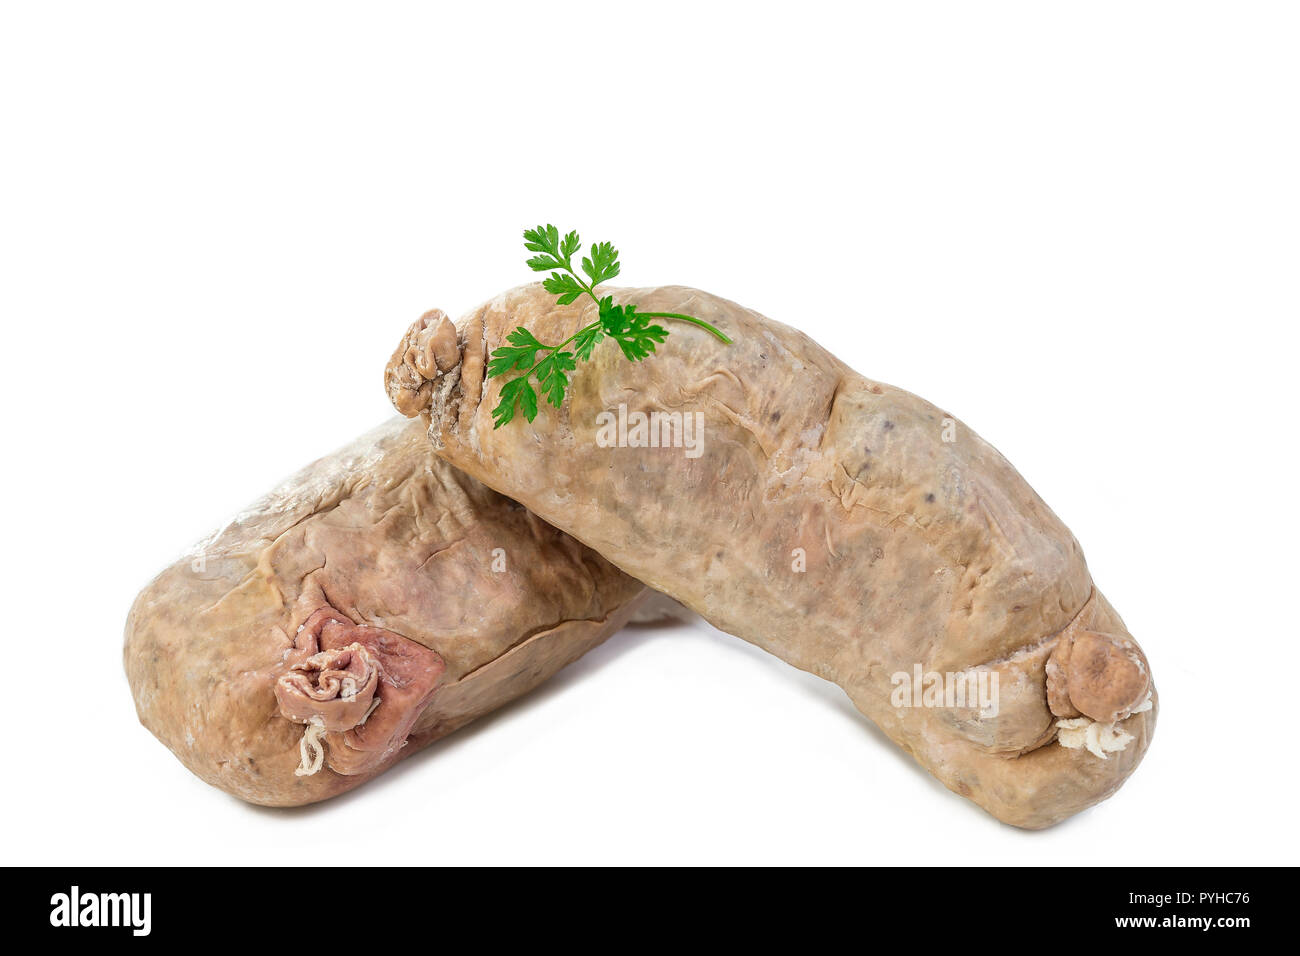 andouillette: French typical sausage from pork intestine on a white background Stock Photo